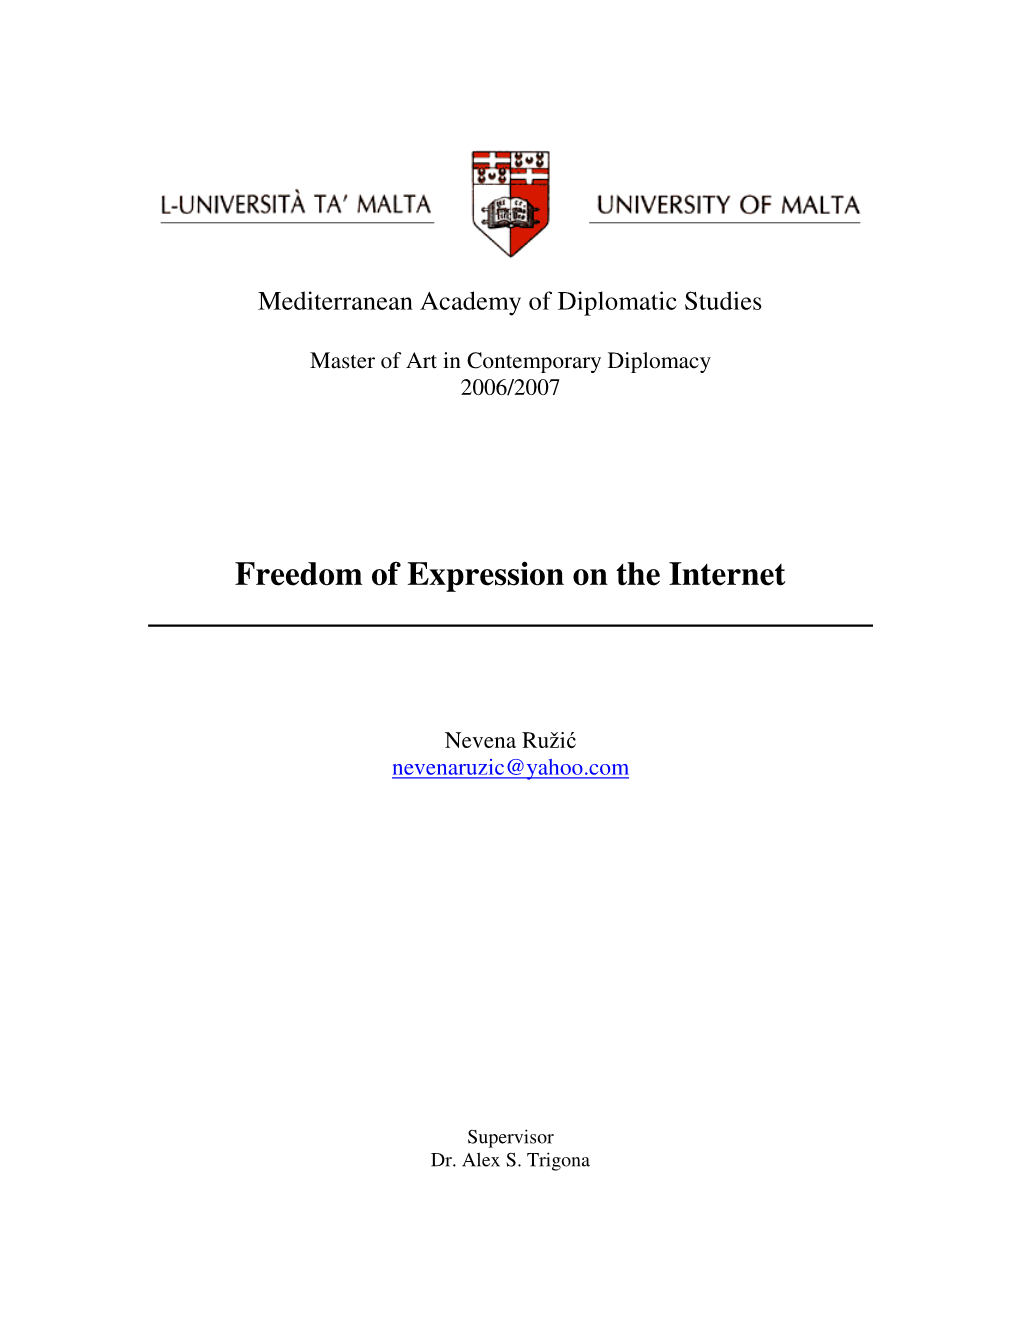 Freedom of Expression on the Internet